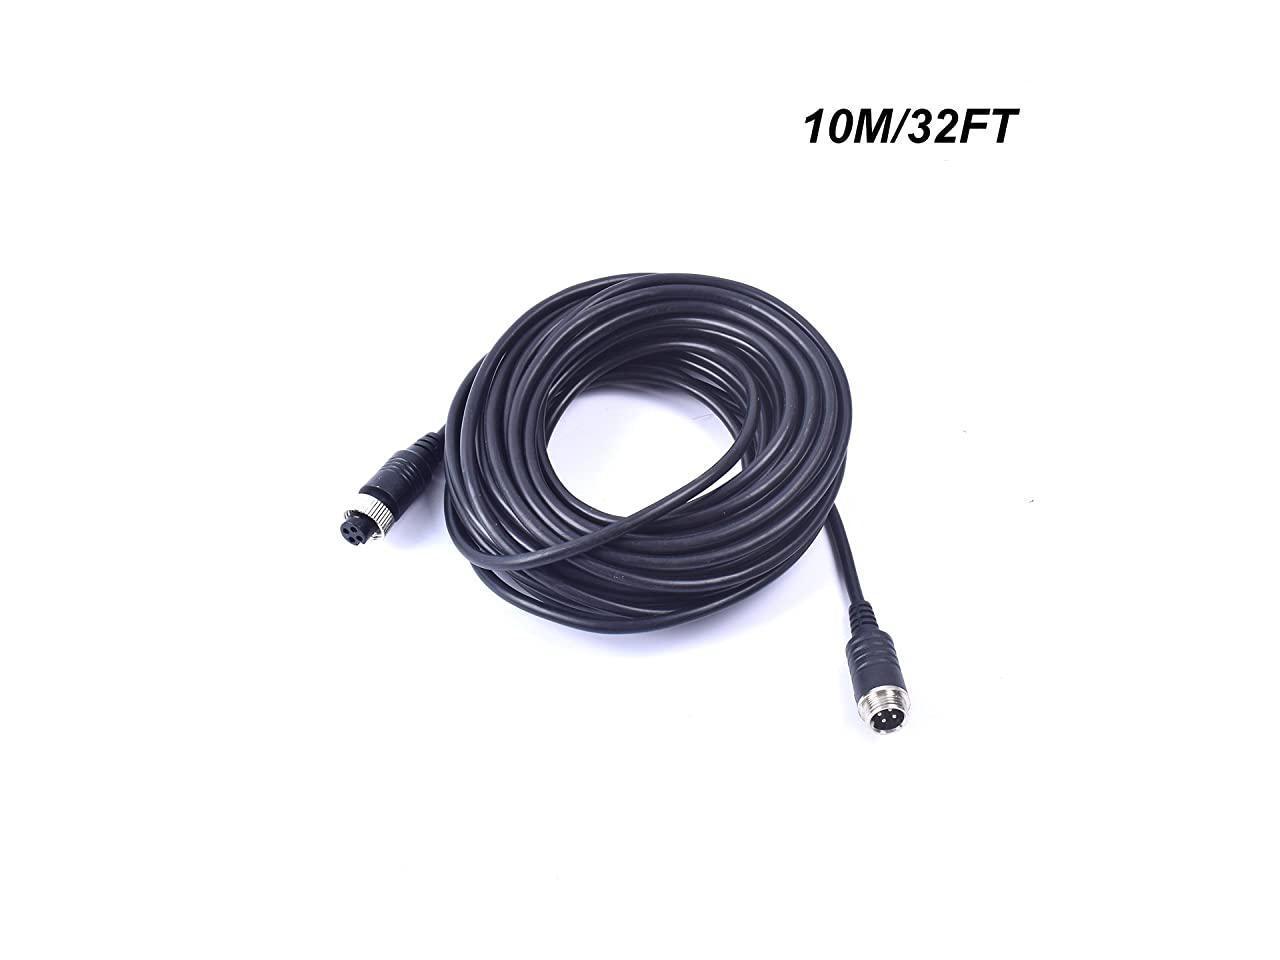 Backup Camera Cable 4PIN Video Power Aviation Extension Wire for Vehicle Car Camper Bus Van Truck Motorhome Trailer RV Reverse Rearview Parking Monitor CCTV System Waterproof Shock Proof 10m 32.8ft 